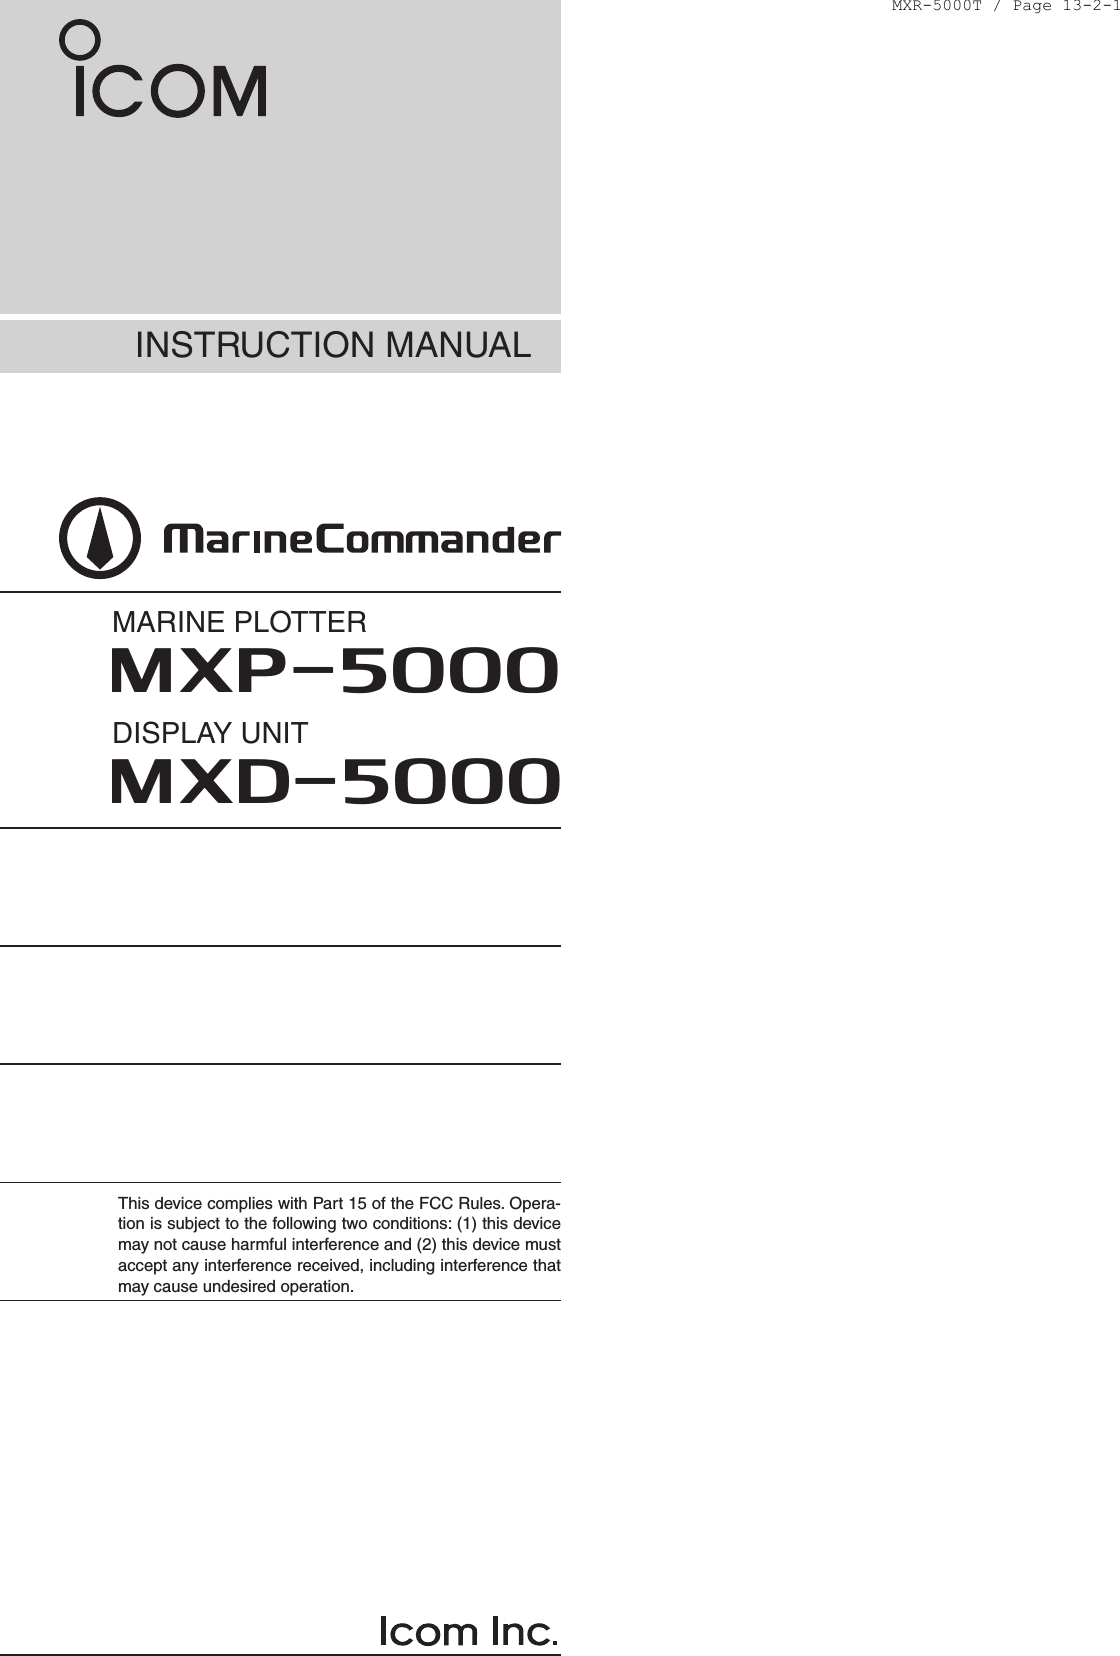 INSTRUCTION MANUALMARINE PLOTTERDISPLAY UNITMXP-5000MXD-5000This device complies with Part 15 of the FCC Rules. Opera-tion is subject to the following two conditions: (1) this device may not cause harmful interference and (2) this device must accept any interference received, including interference that may cause undesired operation.MXR-5000T / Page 13-2-1